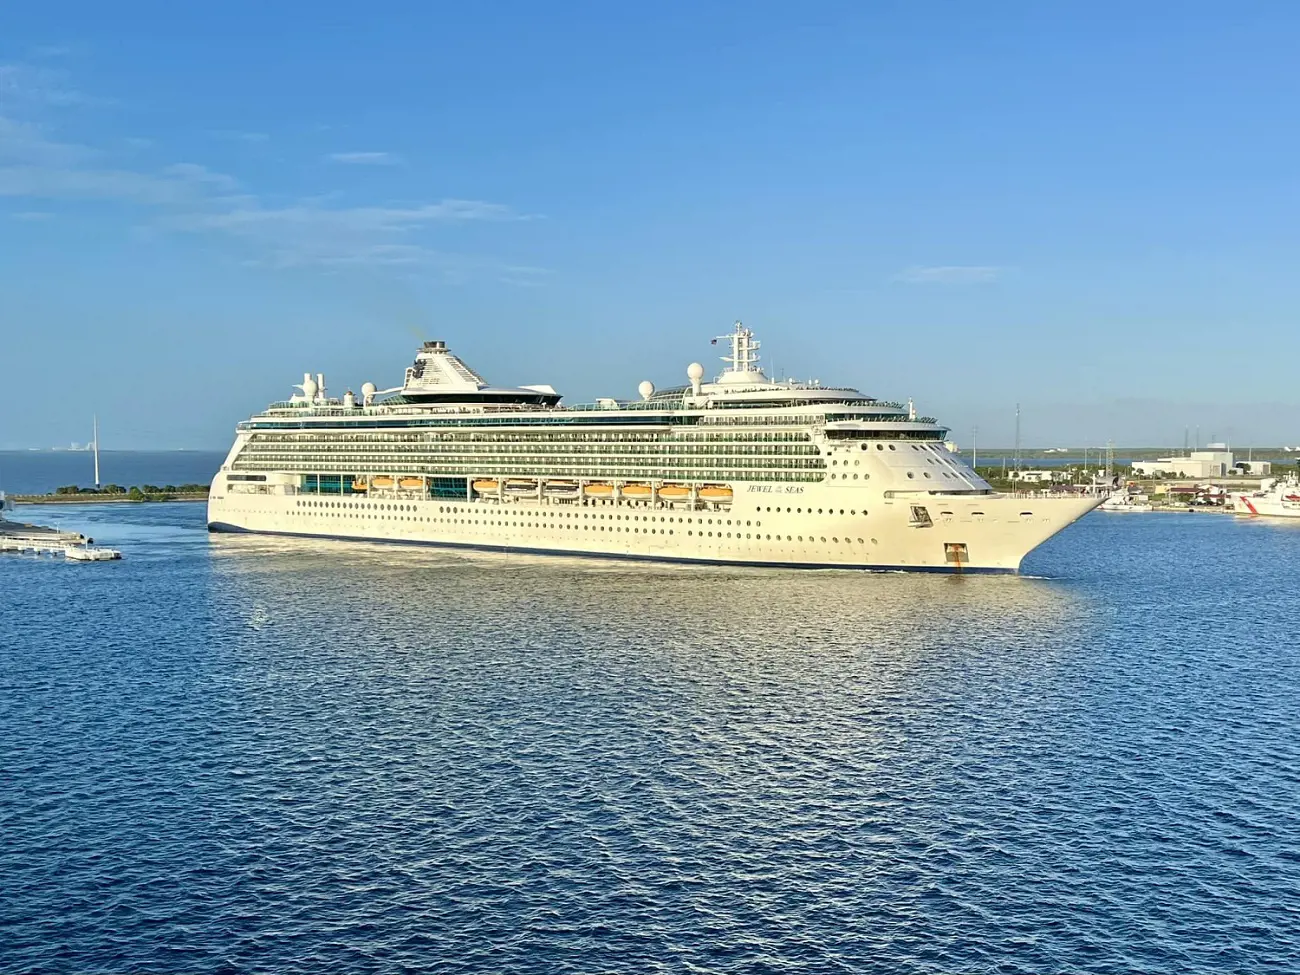 Jewel of the Seas sailing to Port Canaveral on November 7, 2022